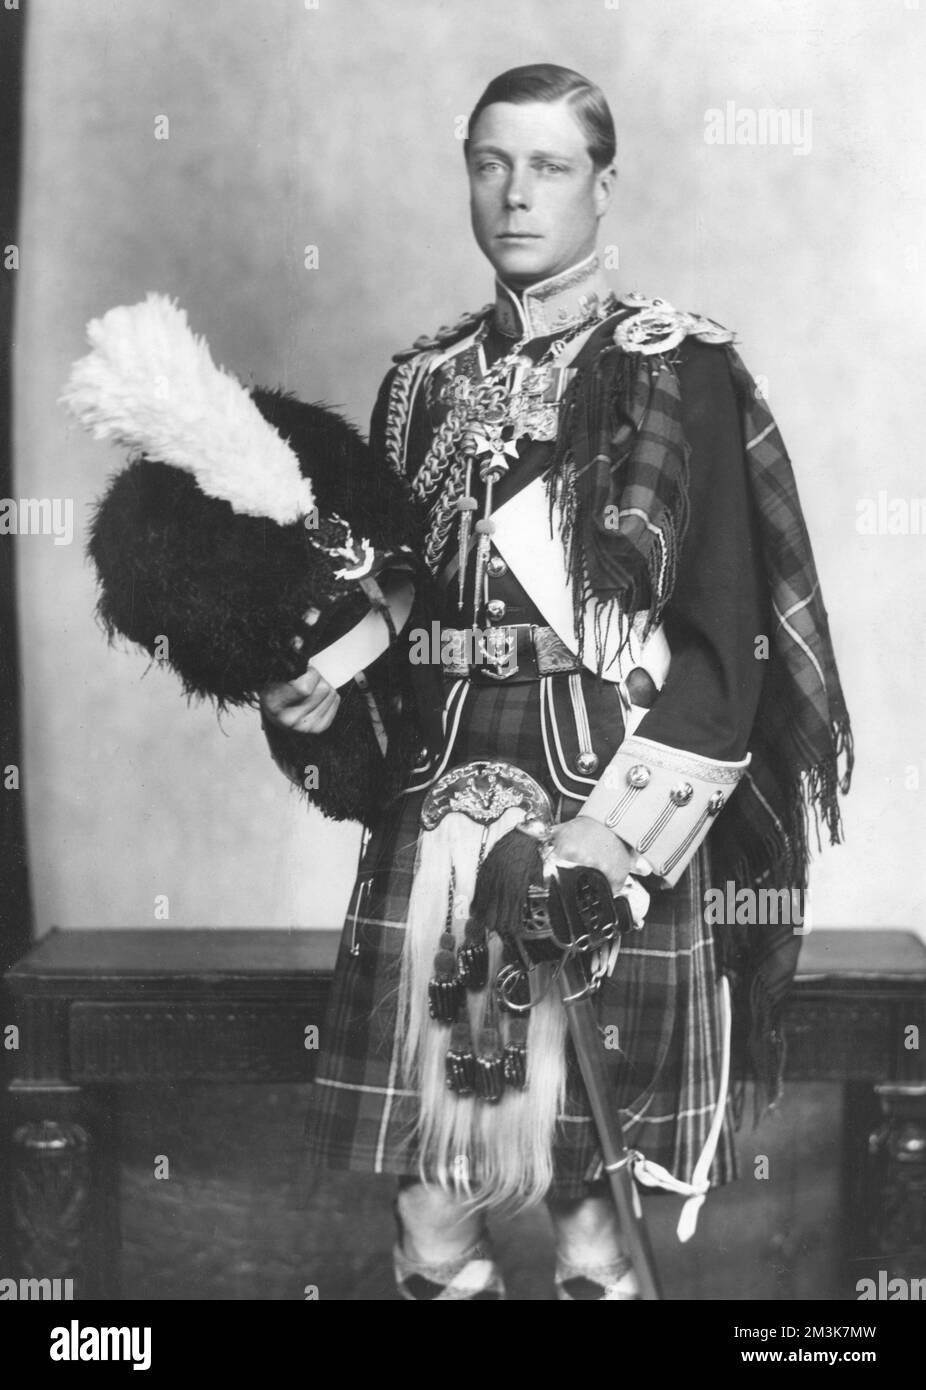 Prince Edward of Wales (1894-1972), later King Edward VIII and Duke of Windsor dressed in the uniform of the Seaforth Highlanders. Stock Photo